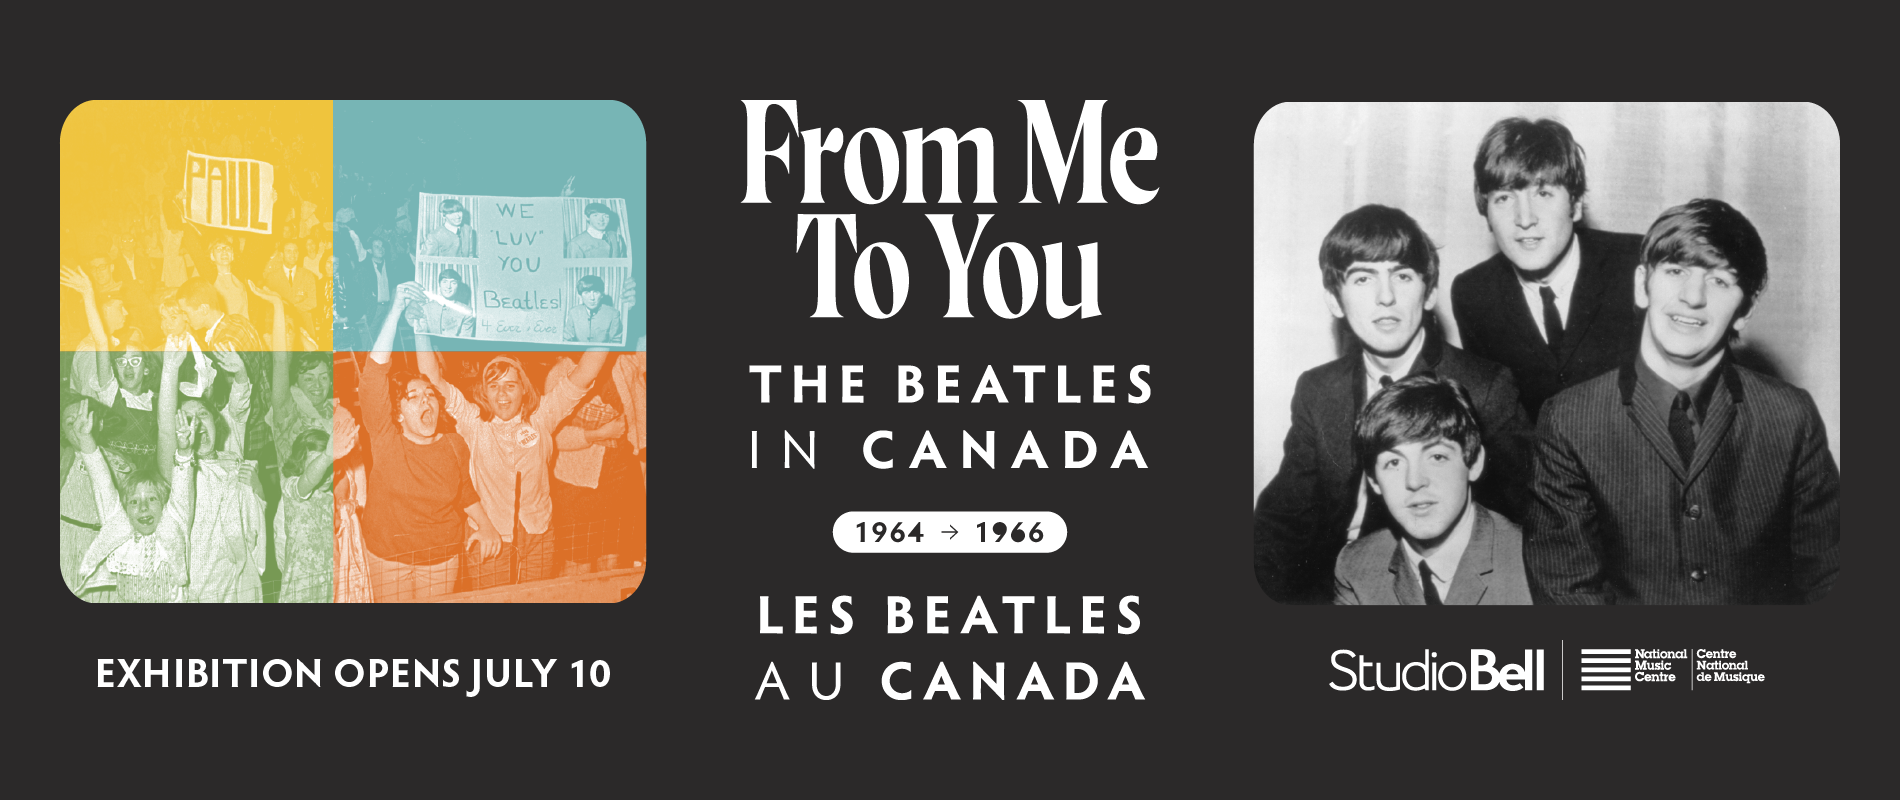 National Music Centre Launches New Exhibition Commemorating 60th Anniversary of The Beatles’ Arrival in Canada